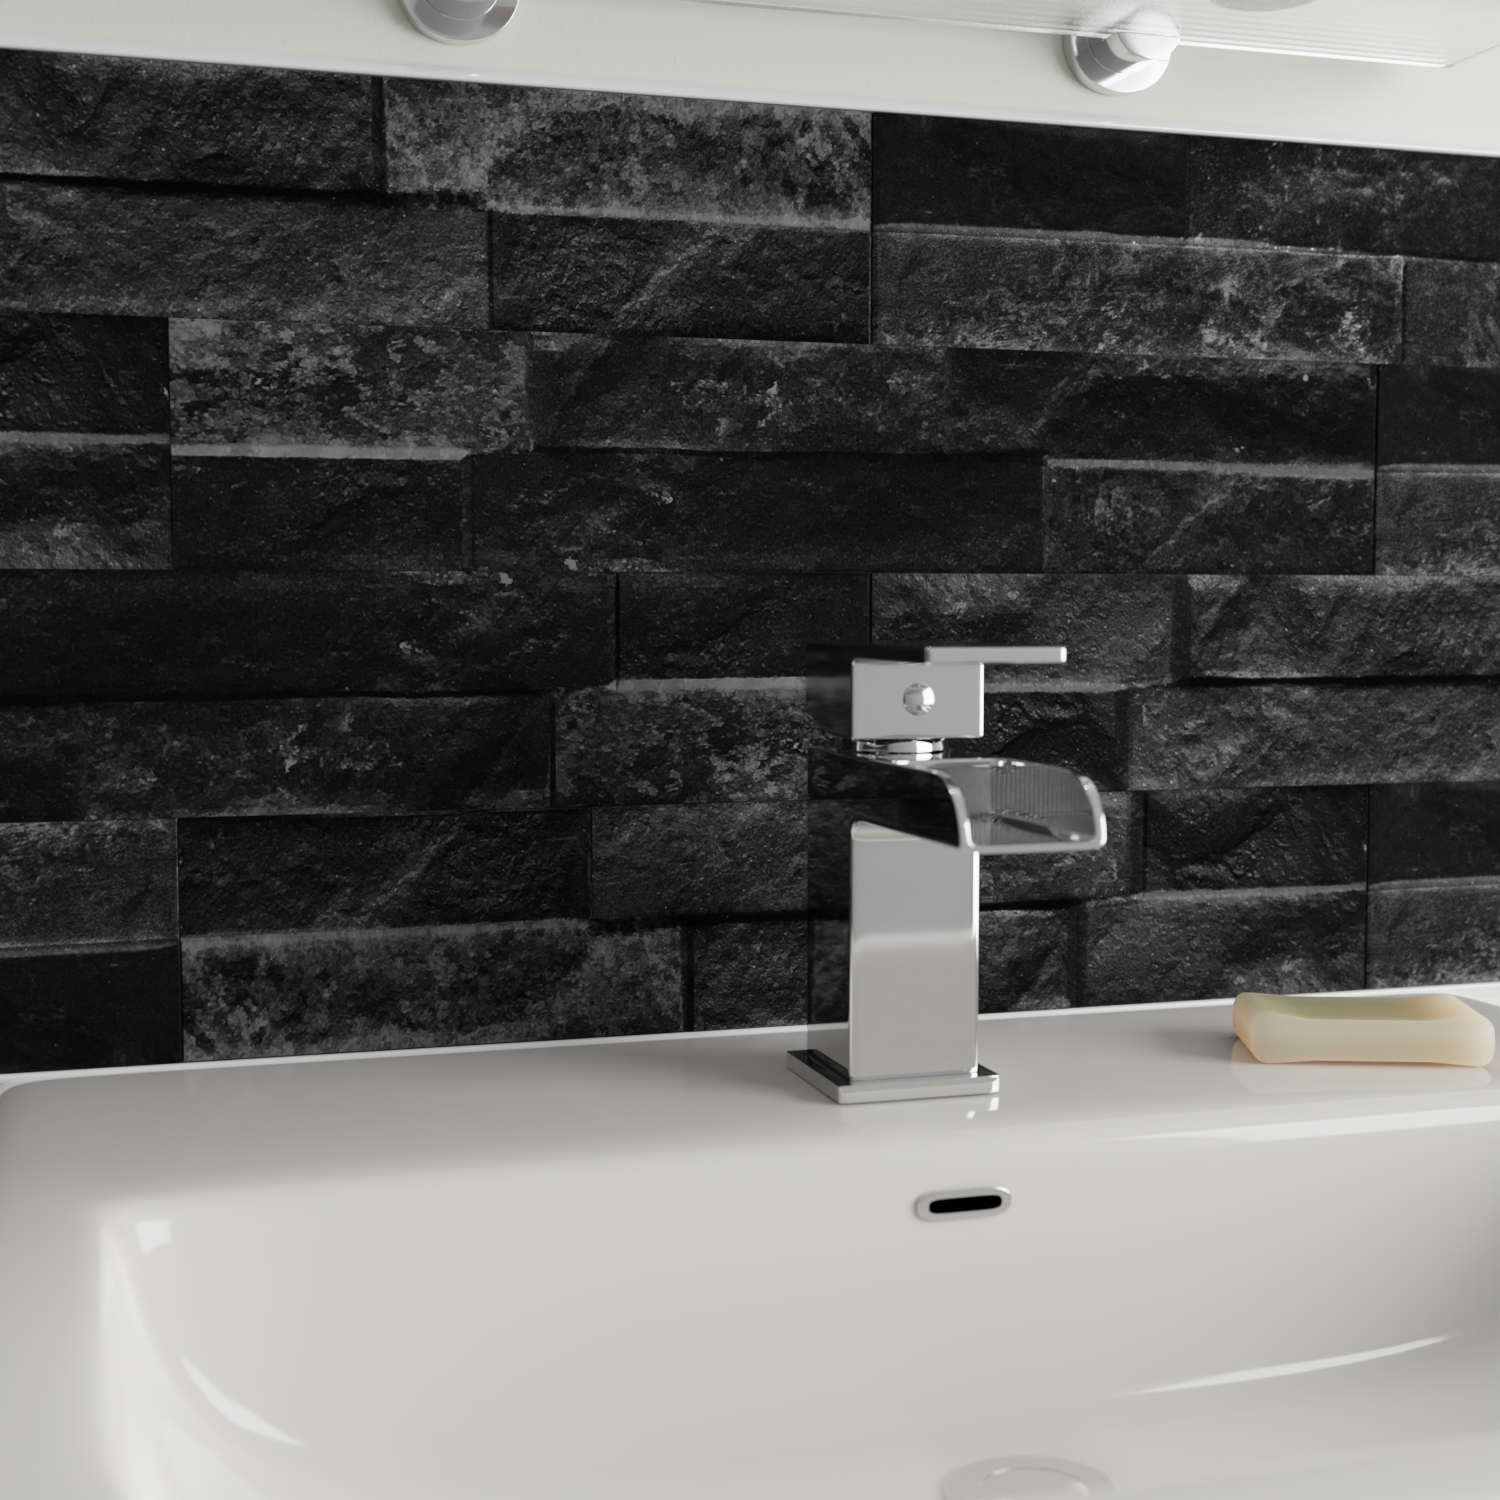 Stone-Effect Tiled Bathroom Feature Wall Behind Sink